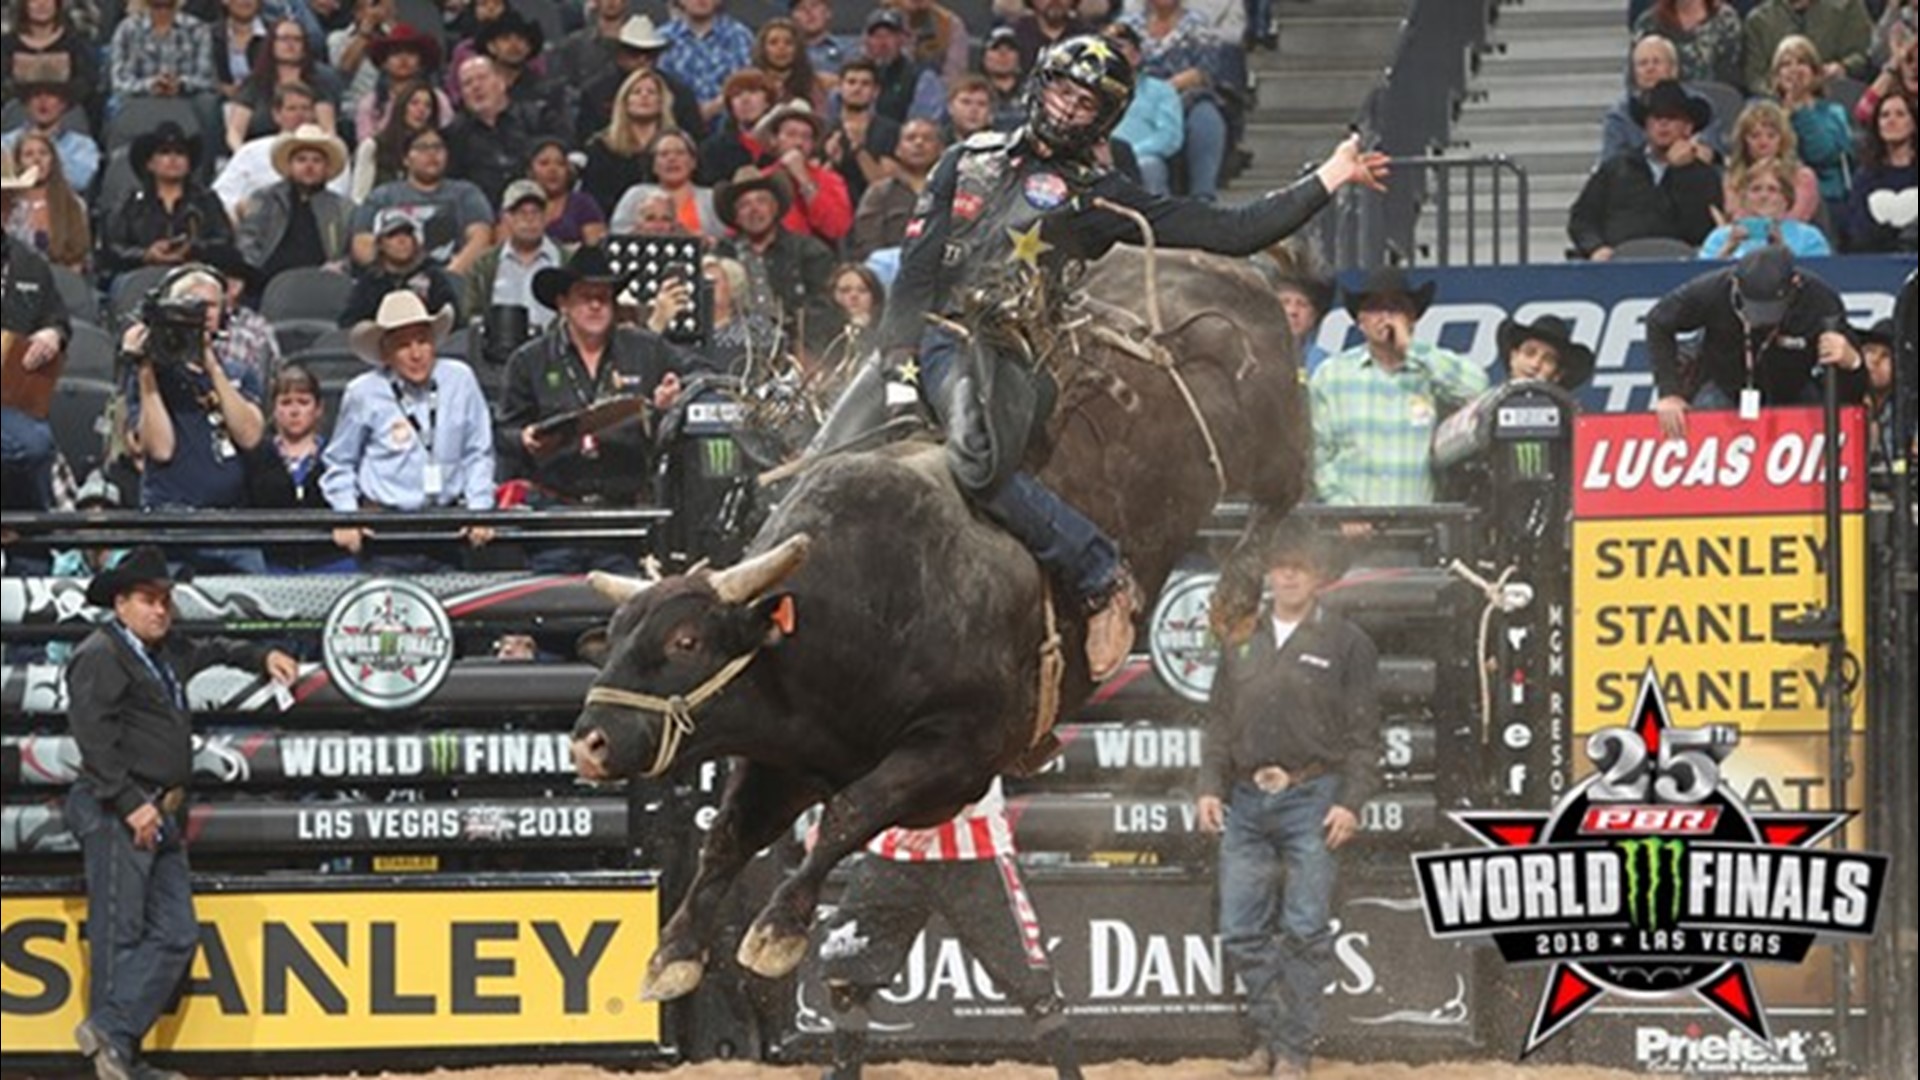 SE Texas native now 4th ranked professional bull rider in the world